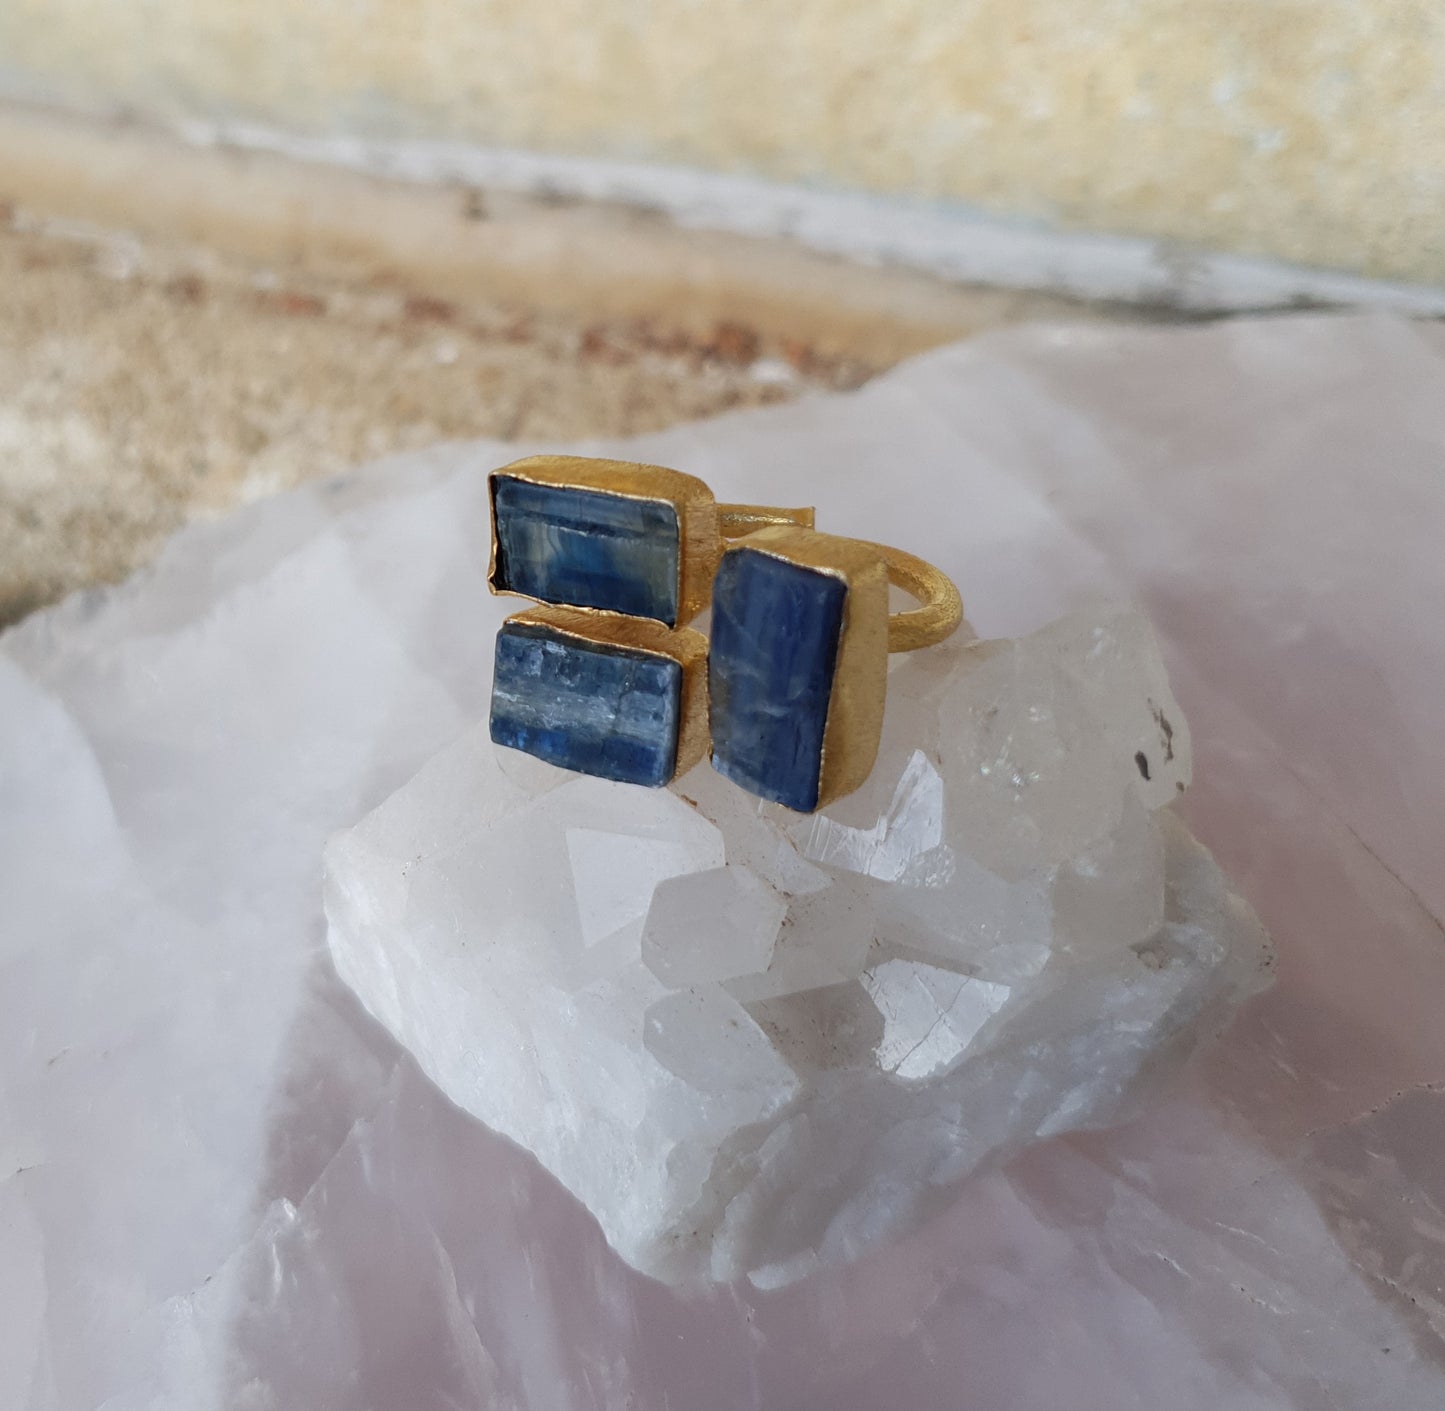 A large gold ring with a triple setting of blue kyanite